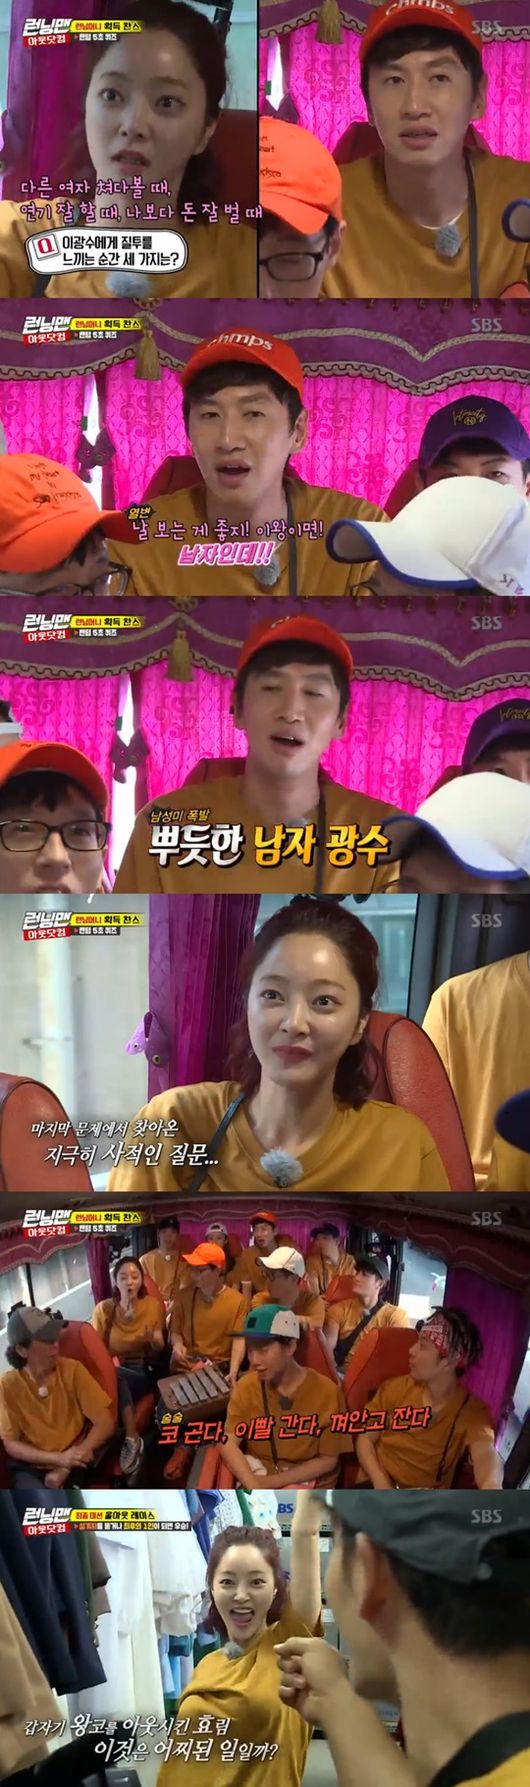 Seo Hyo-rim, who appeared in Running Man, attracted attention by conveying the charm of sweet salvage that Lee Kwangsoo was heard.In the SBS entertainment program Running Man broadcasted on the afternoon of the 19th, In-N-Out Burger.com featured In-N-Out Burger.com, which is a race with running money, starring 3 villains actors Kim Roe Ha, Kwak Si-yang and Seo Hyo-rim.The three villains had a special relationship with the members.Kim had met Lee Kwangsoo through The Sound of the Heart and said to Lee Kwangsoo, I had such a good luck.This was the first time this Friend was there, he laughed. Kwak Si-yang also had a face with the members of the entertainment industry, Running Man.Seo Hyo-rim recalled a special first meeting with Lee Kwangsoo, who have been in a relationship since their debut, between longtime friends.Seo Hyo-rim grabbed the neck of Lee Kwangsoo, who was blazing at him, and laughed, saying, I came to catch you today.I once gave a prize to Mr. Kwangsoo, who informed his face with AD before he made his debut, I was the prize winner, Mr. Kwangsoo, said Seo Hyo-rim.Seo Hyo-rim, who had taken a sitcom with Lee Kwangsoo, surprised everyone by revealing to Lee Kwangsoo, I was so drunk and chasing at that time.The members said, Did you do that at that time?Seo Hyo-rim, who was looking at Lee Kwangsoo and looked at it happily, said, I did it in the play. He laughed at Lee Kwangsoo.Lee Kwangsoo was forced to be helpless by the Seo Hyo-rim.But there was also a sweet chemi.Seo Hyo-rim shouted at the speed quiz on Lee Kwangsoo when Lee Kwangsoo had to do three things when he was jealous: When you look at another woman, when you are acting well, when you are making better money than me.Why are you jealous when you look at another woman? When the pinky suspicion occurred, Seo Hyo-rim replied, I am a man, but if you are a man, you should see me.Also when asked about Lee Kwangsoos sleeping habits, Seo Hyo-rim shouted out loud, Nostalgia, teeth go, cuddle and sleep.The members of Running Man who have slept with Lee Kwangsoo have been aware of Lee Kwangsoos sleeping habits accurately. This is all right.How do you know that? he said, surprised.Seo Hyo-rim explained, I watched it while shooting a sitcom, but the pink glow circled between the two in the appearance of Seo Hyo-rim, who even knew Lee Kwangsoos sleeping habits.In Race, Seo Hyo-rim reveals the wild charm.He worked hard to calculate and spent 200,000 won on buying Ji Suk-jins name tag, and gave a reversal to trick Ji Suk-jin to surprise In-N-Out Burger.But because of this, he was immediately targeted and laughed as a fugitive.Seo Hyo-rim chased Yang Se-chan and was mistaken as a designer, but he said, It would be fun to follow that Friend.Seo Hyo-rim, who has heard Lee Kwangsoo and has been running Running Man, immediately took the top spot in real-time search terms on portal sites and stood at the center of the topic.The unique character of the pure but victorious Seo Hyo-rim was enough to give viewers a laugh.Capture the Running Man broadcast.